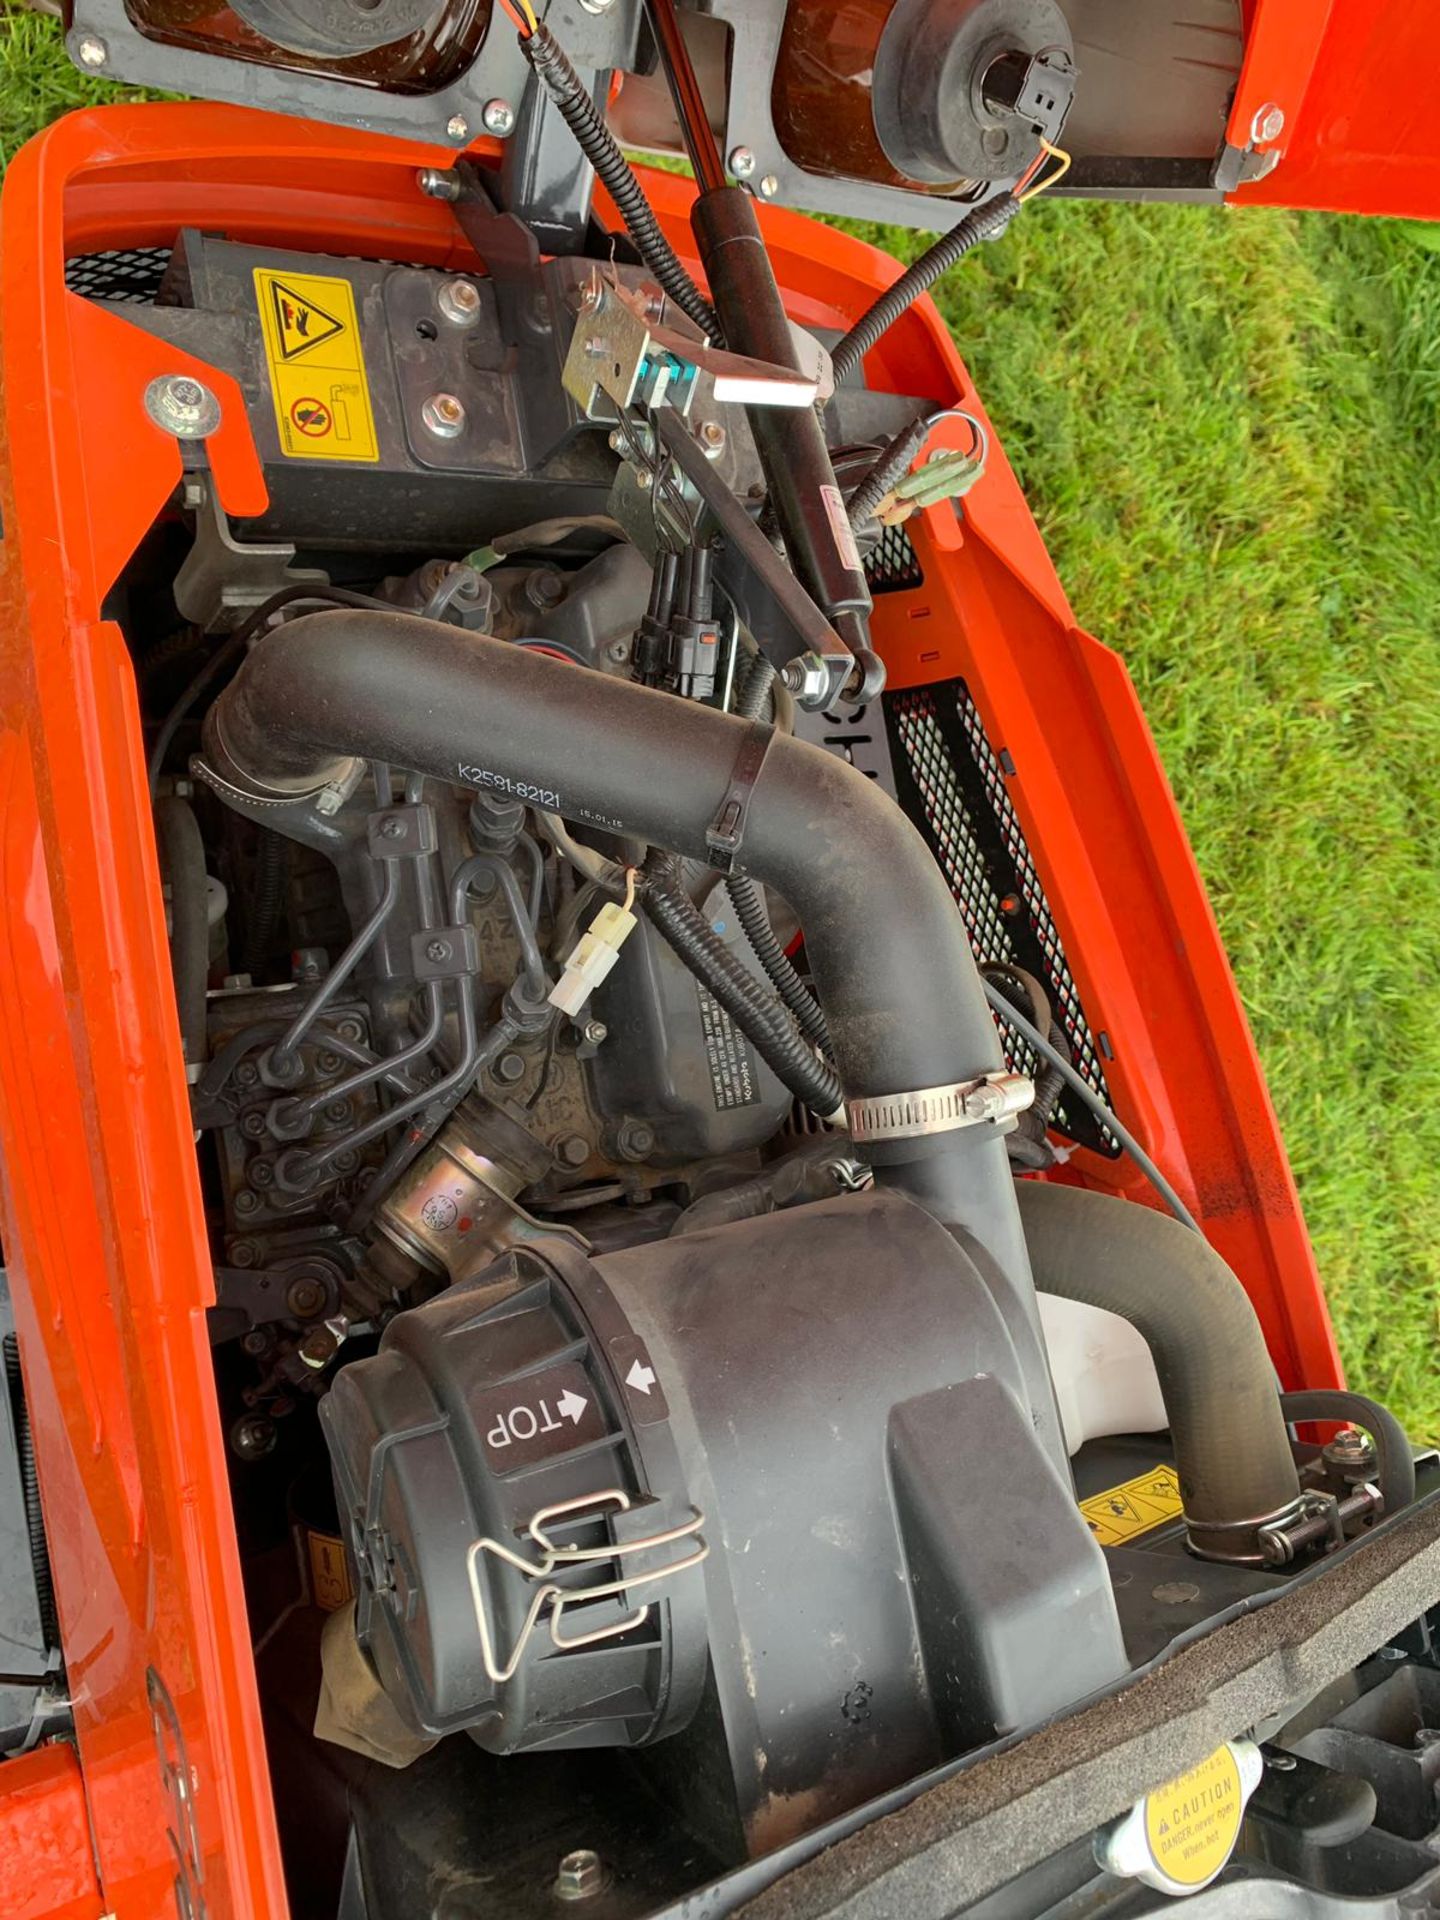 2015 KUBOTA G23-II TWIN CUT LAWN MOWER WITH ROLL BAR, HYDRAULIC TIP, LOW DUMP COLLECTOR *PLUS VAT* - Image 7 of 15